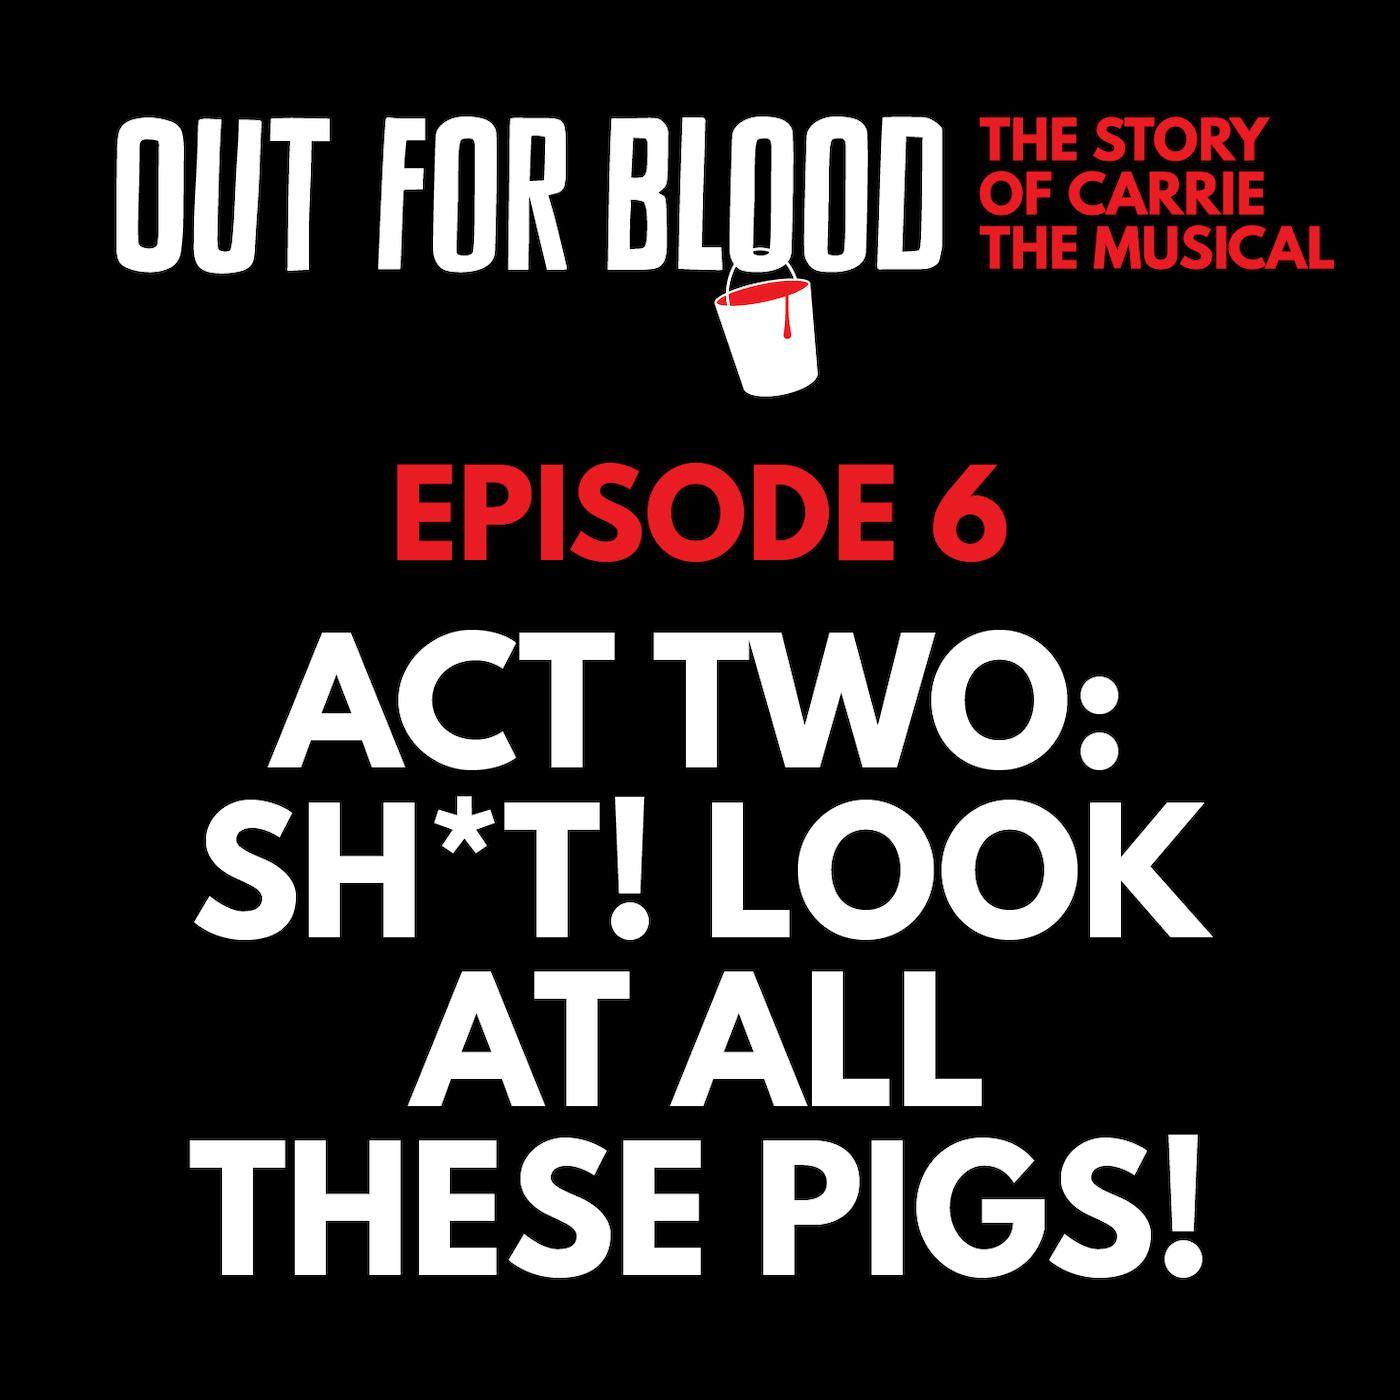 Chapter 6: Act Two: Sh*t! Look at all these pigs!